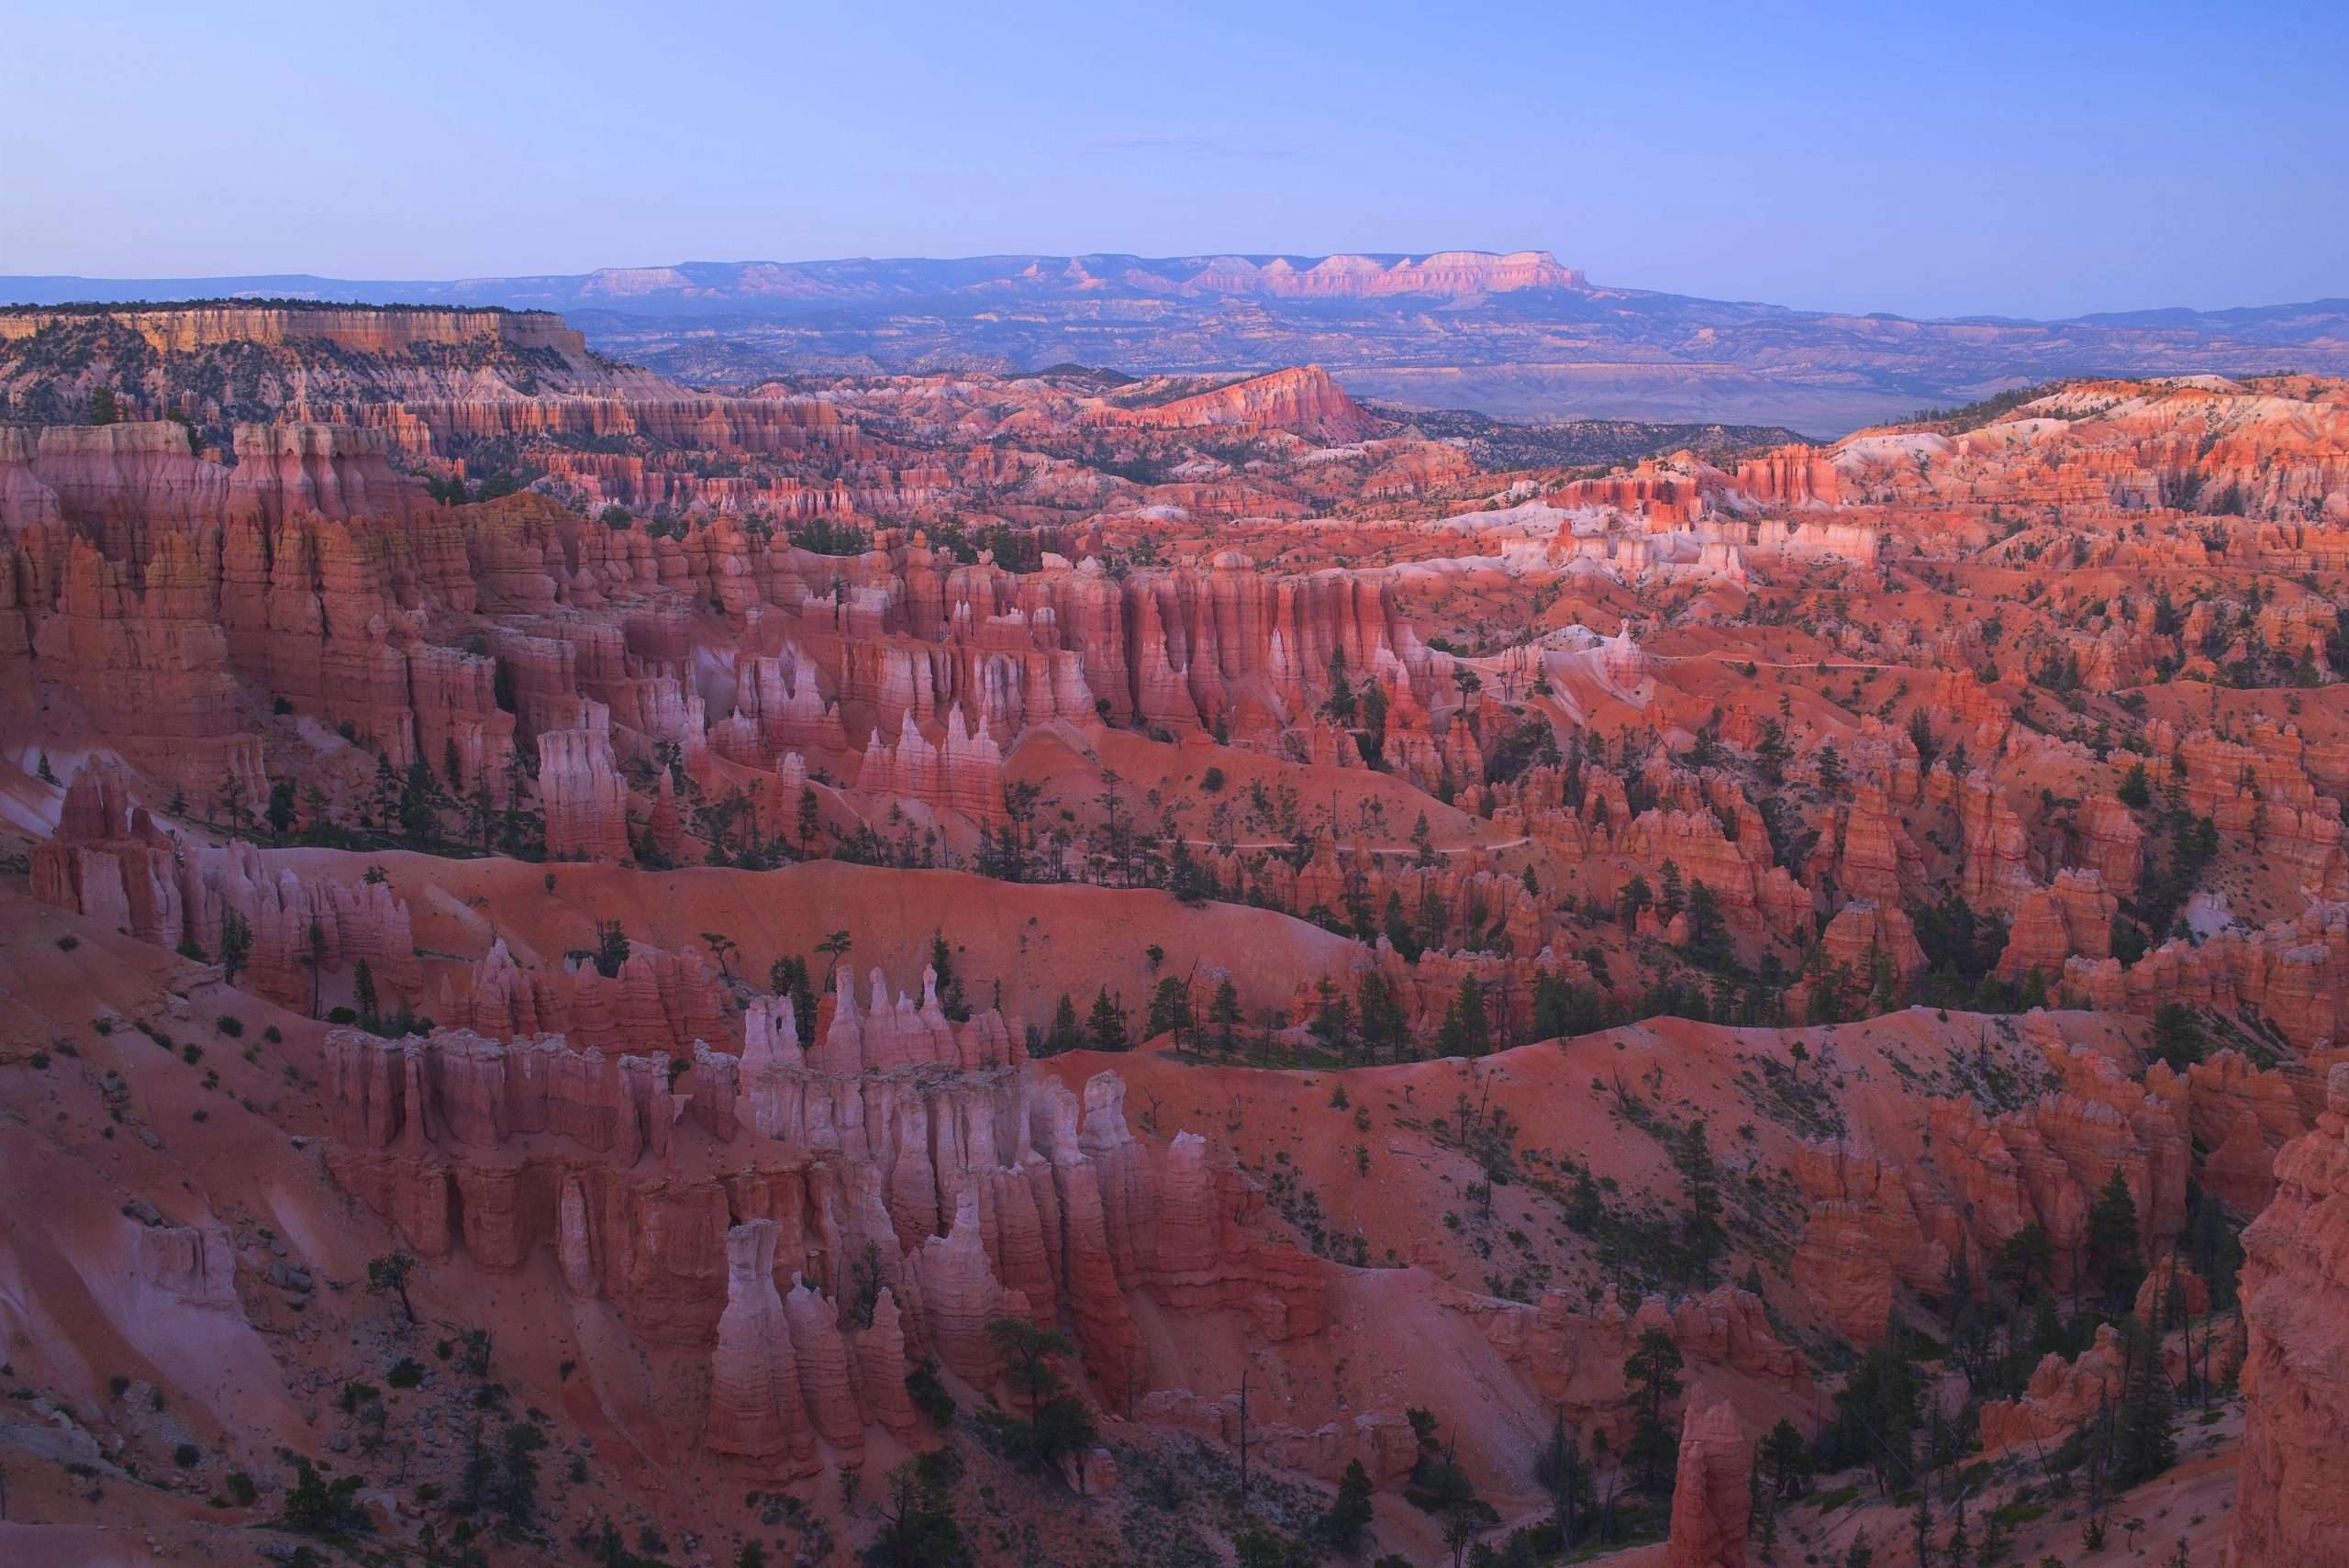 The orange rocks glow late in the day at bryce canyon national park.